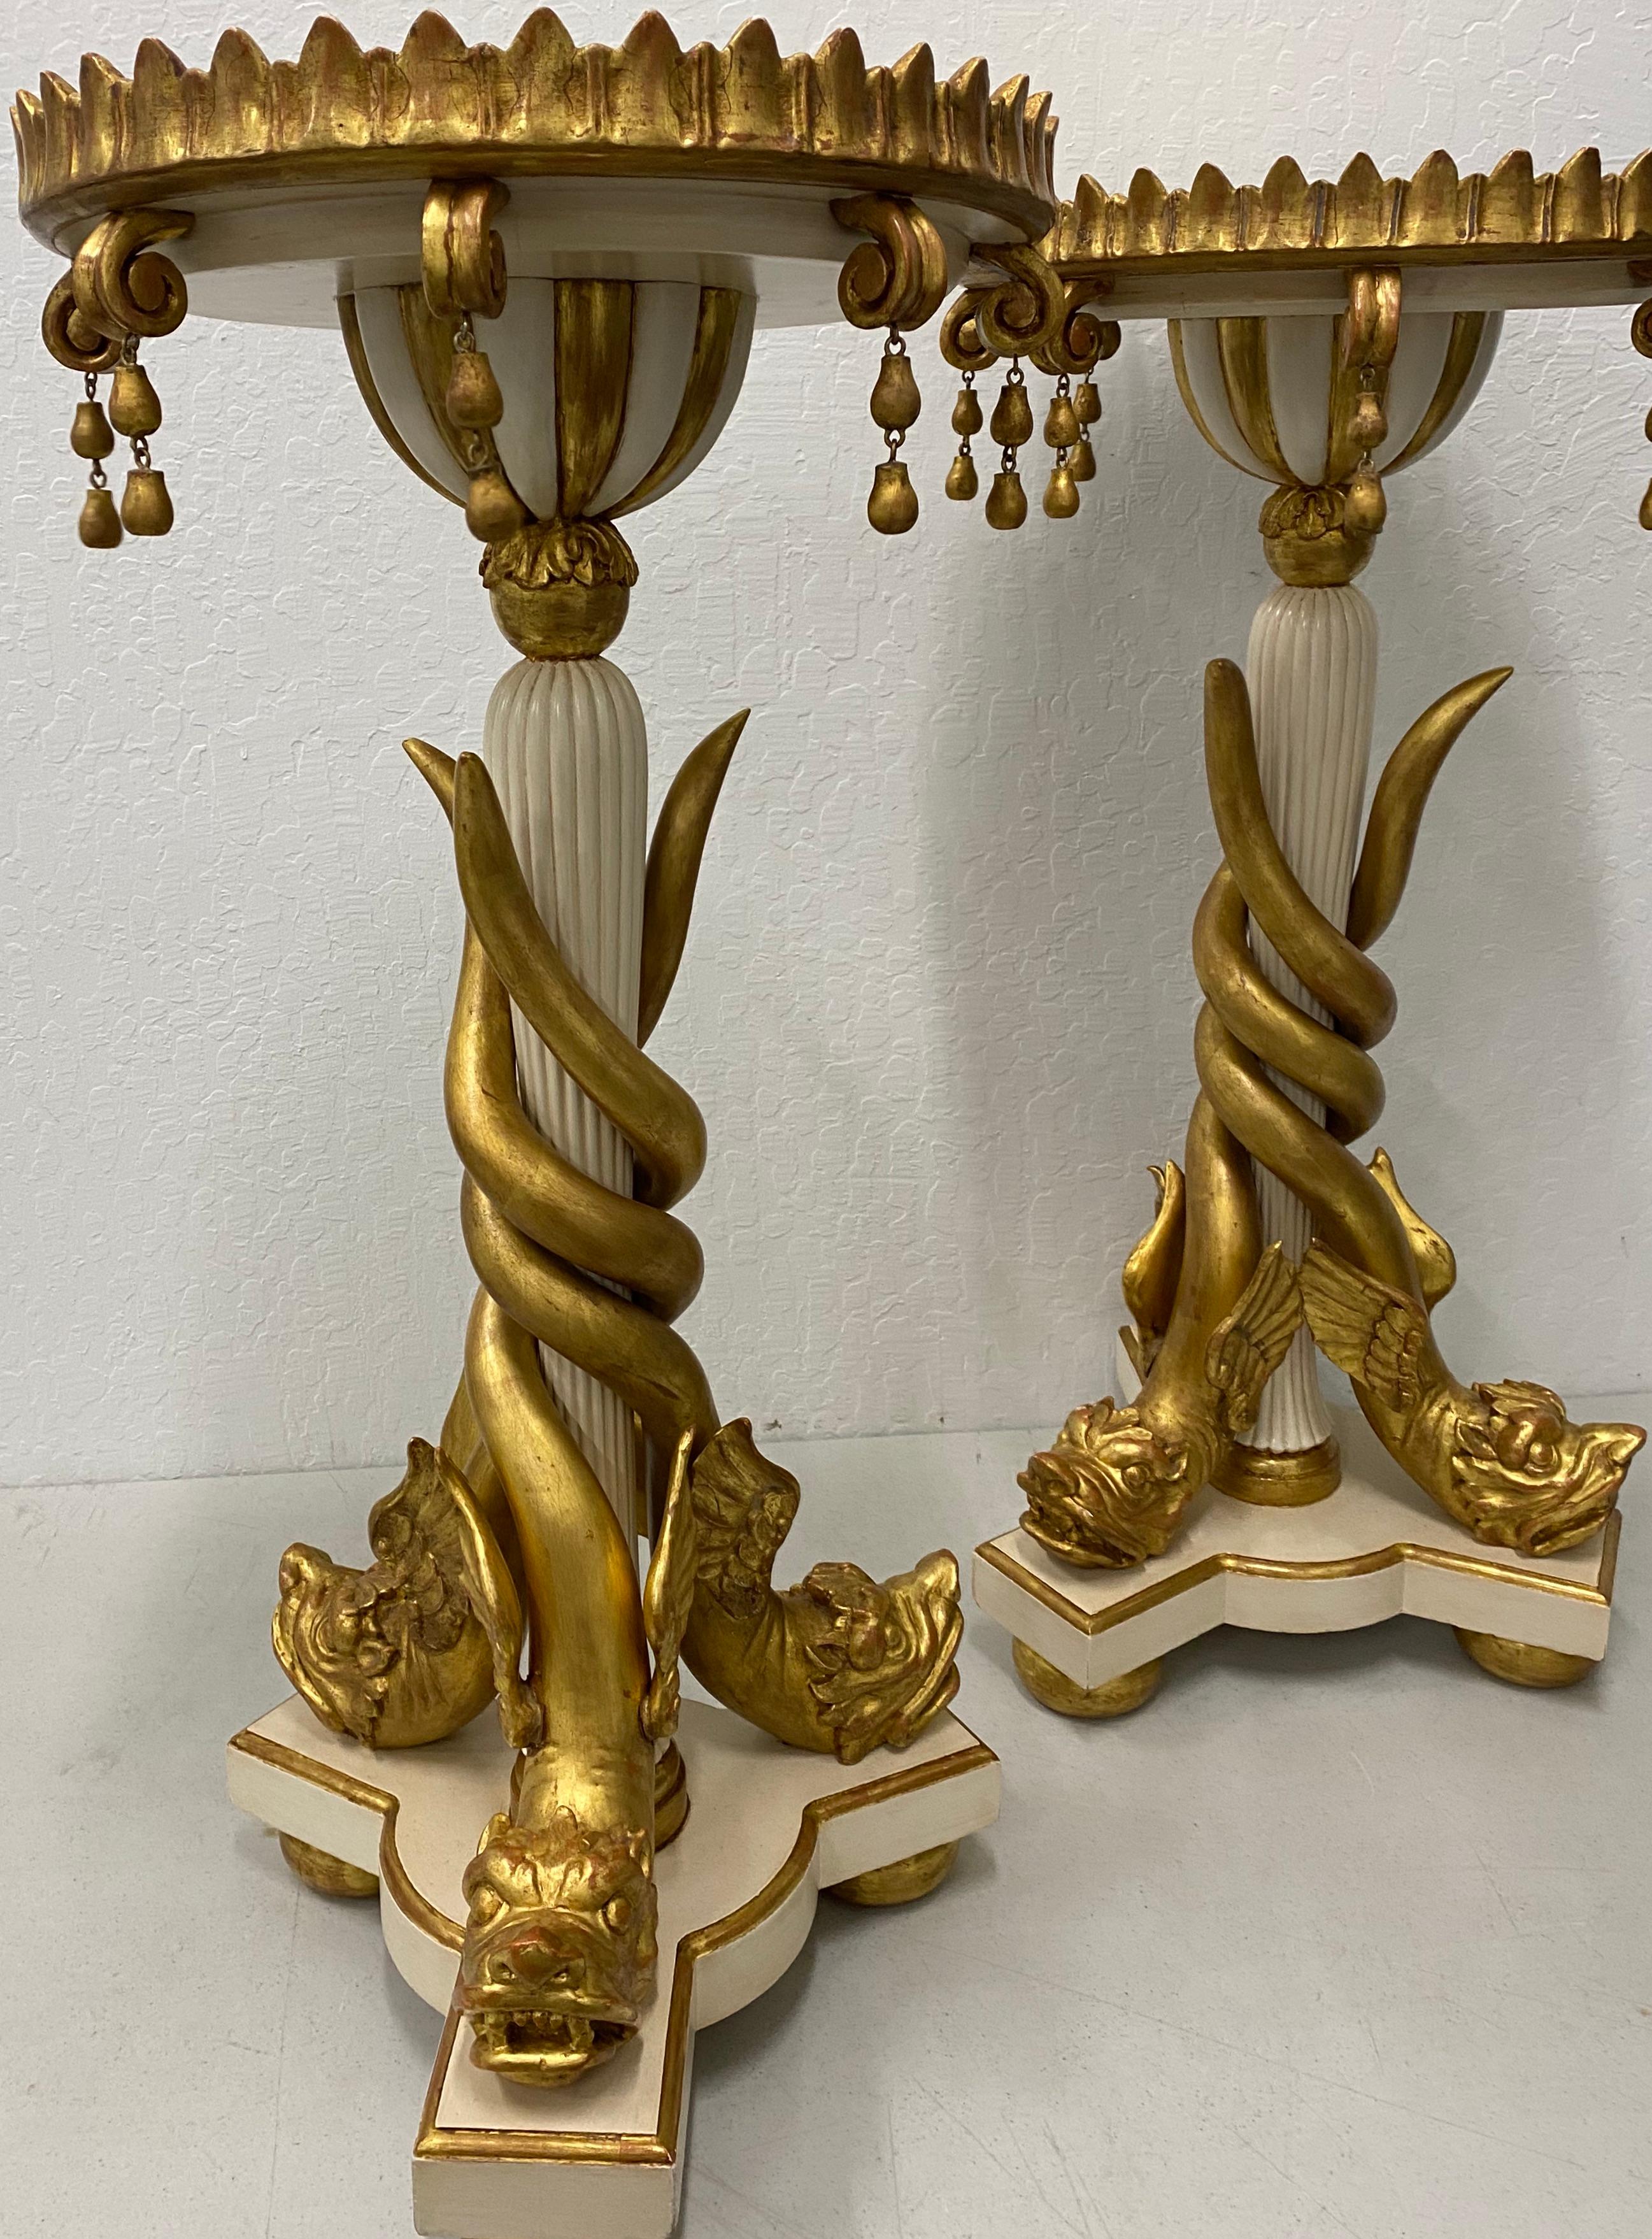 Matching pair of carved and gilded marble-top gueridon stands, circa 1940

Three carved and gilded mythological water serpents supporting a central stand with a marble top. These will make great plant stands, side tables, etc.

Triangular base